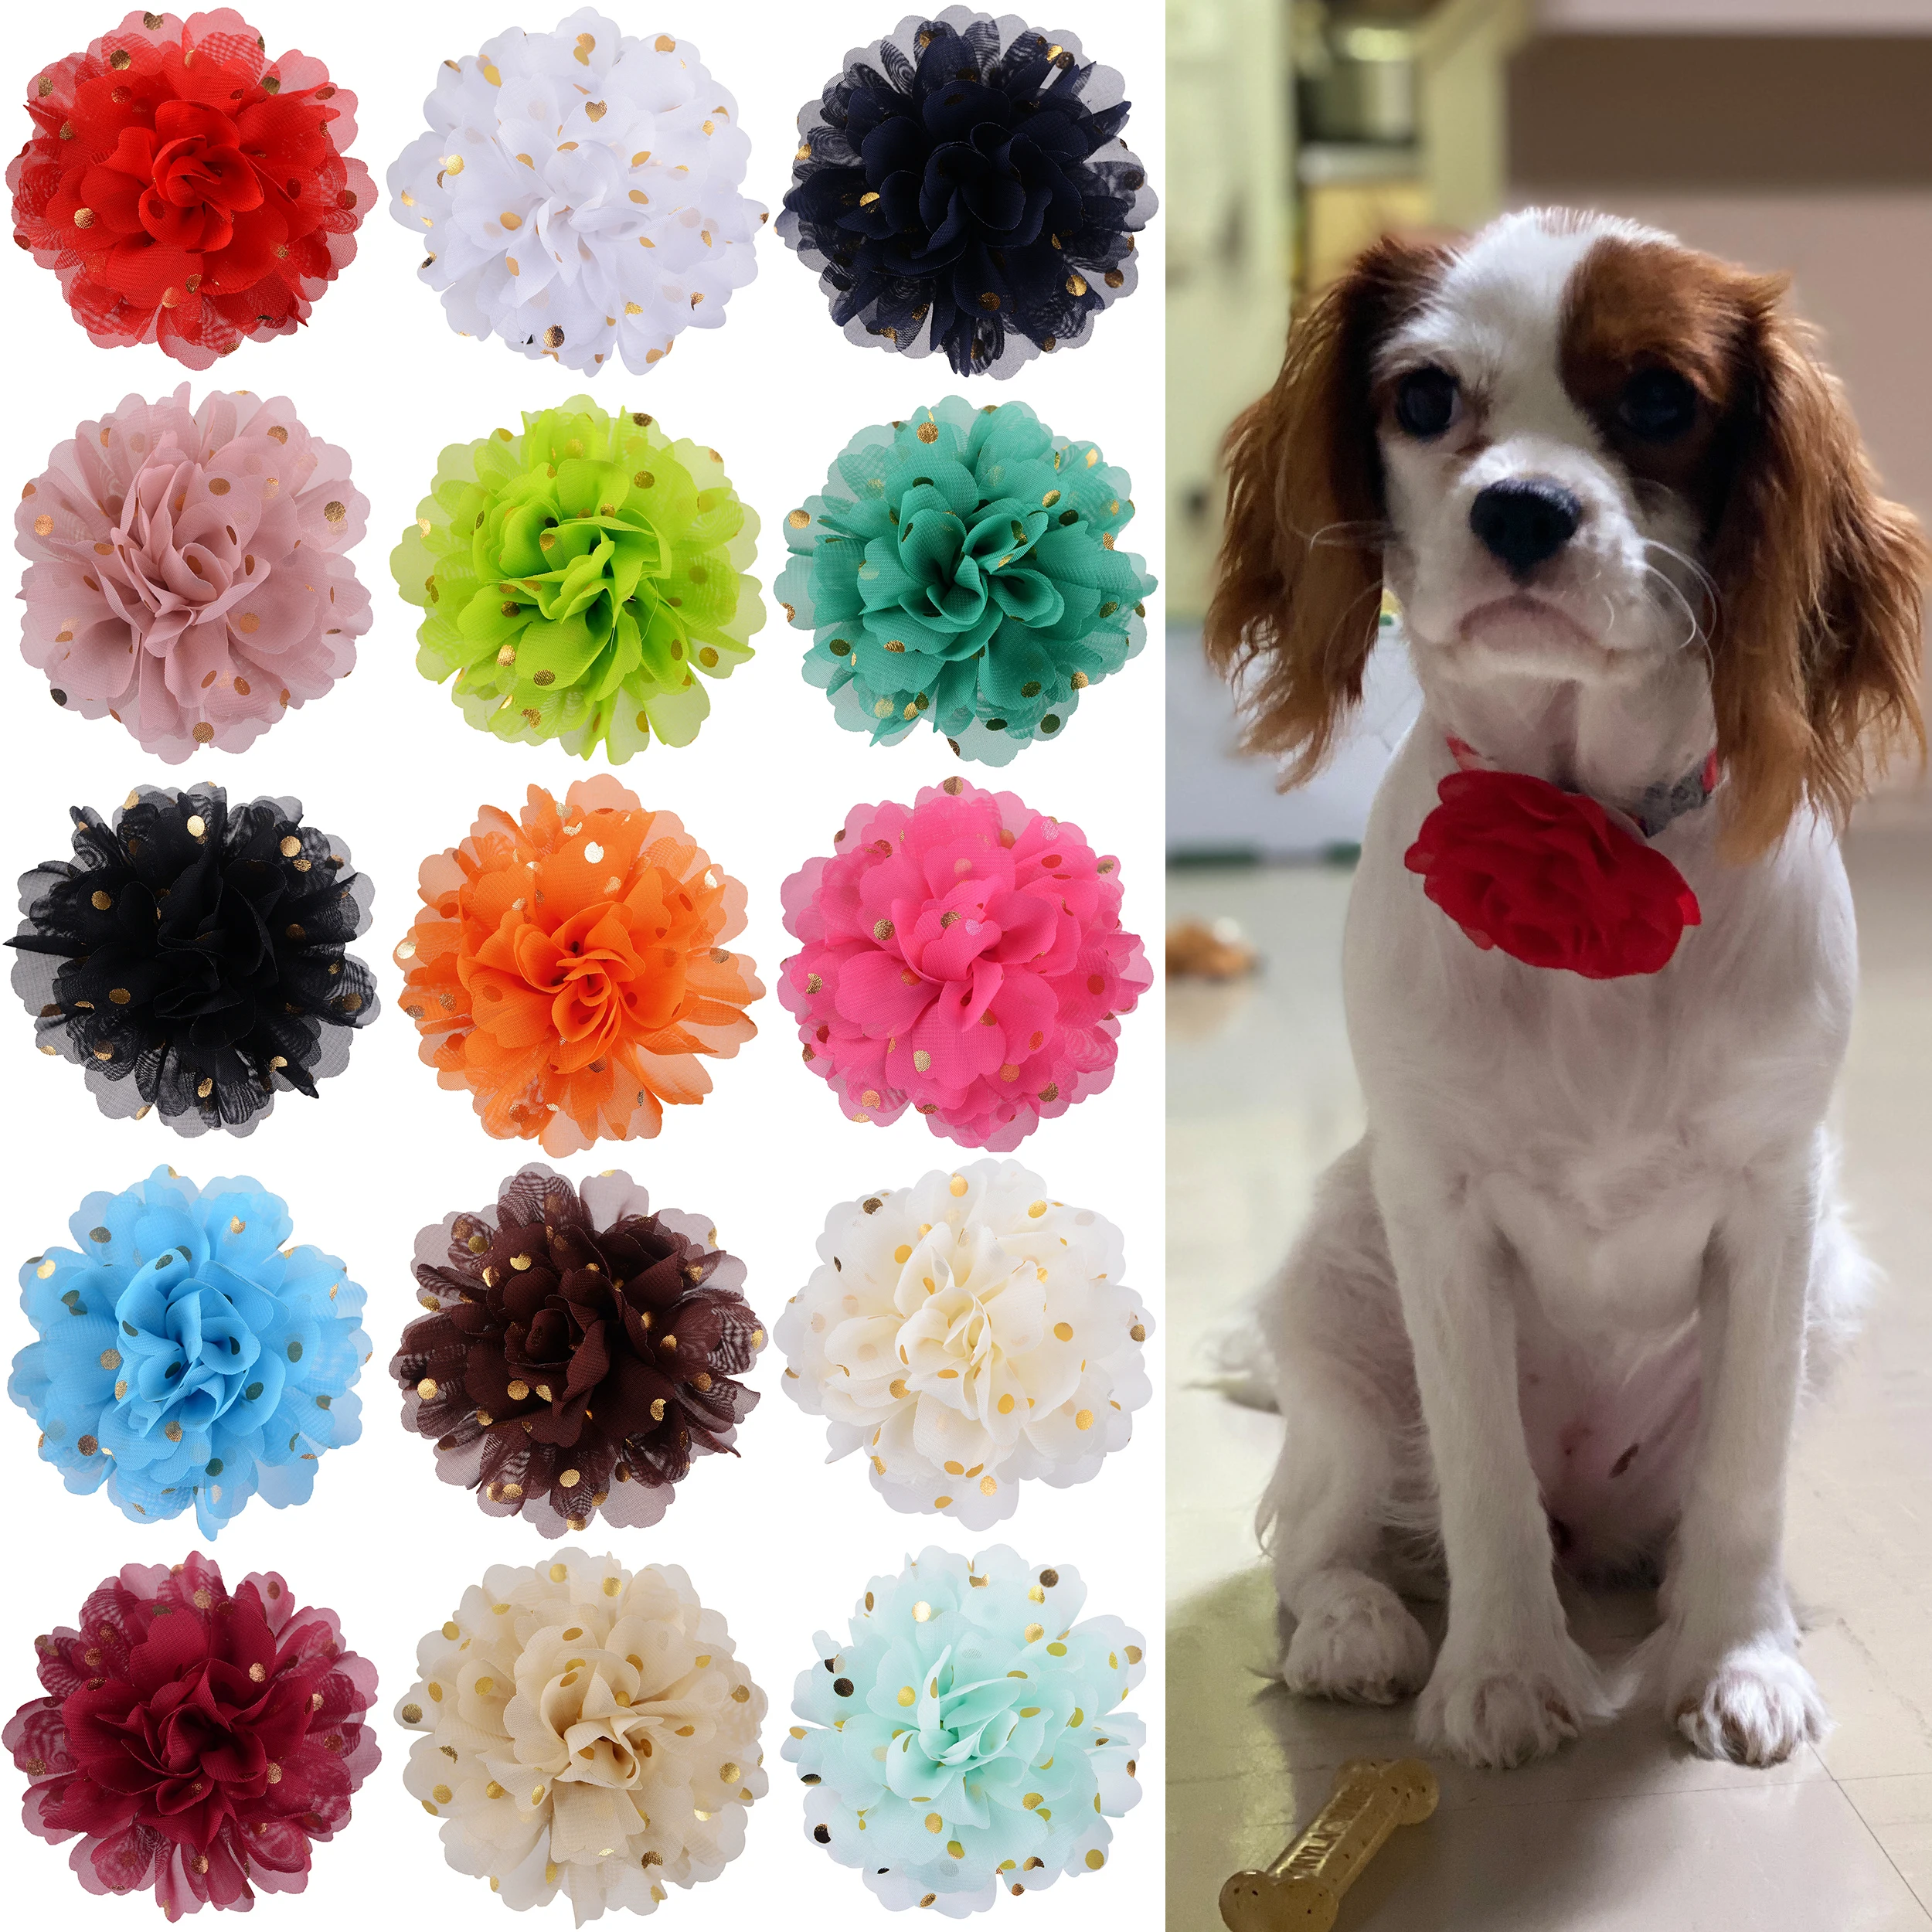 100pcs Dog Flower-Collar dog bow tie Dog Supplies Slidable Pet Dog Collar Accessories Small Dog Cat Bowties Collar Charms